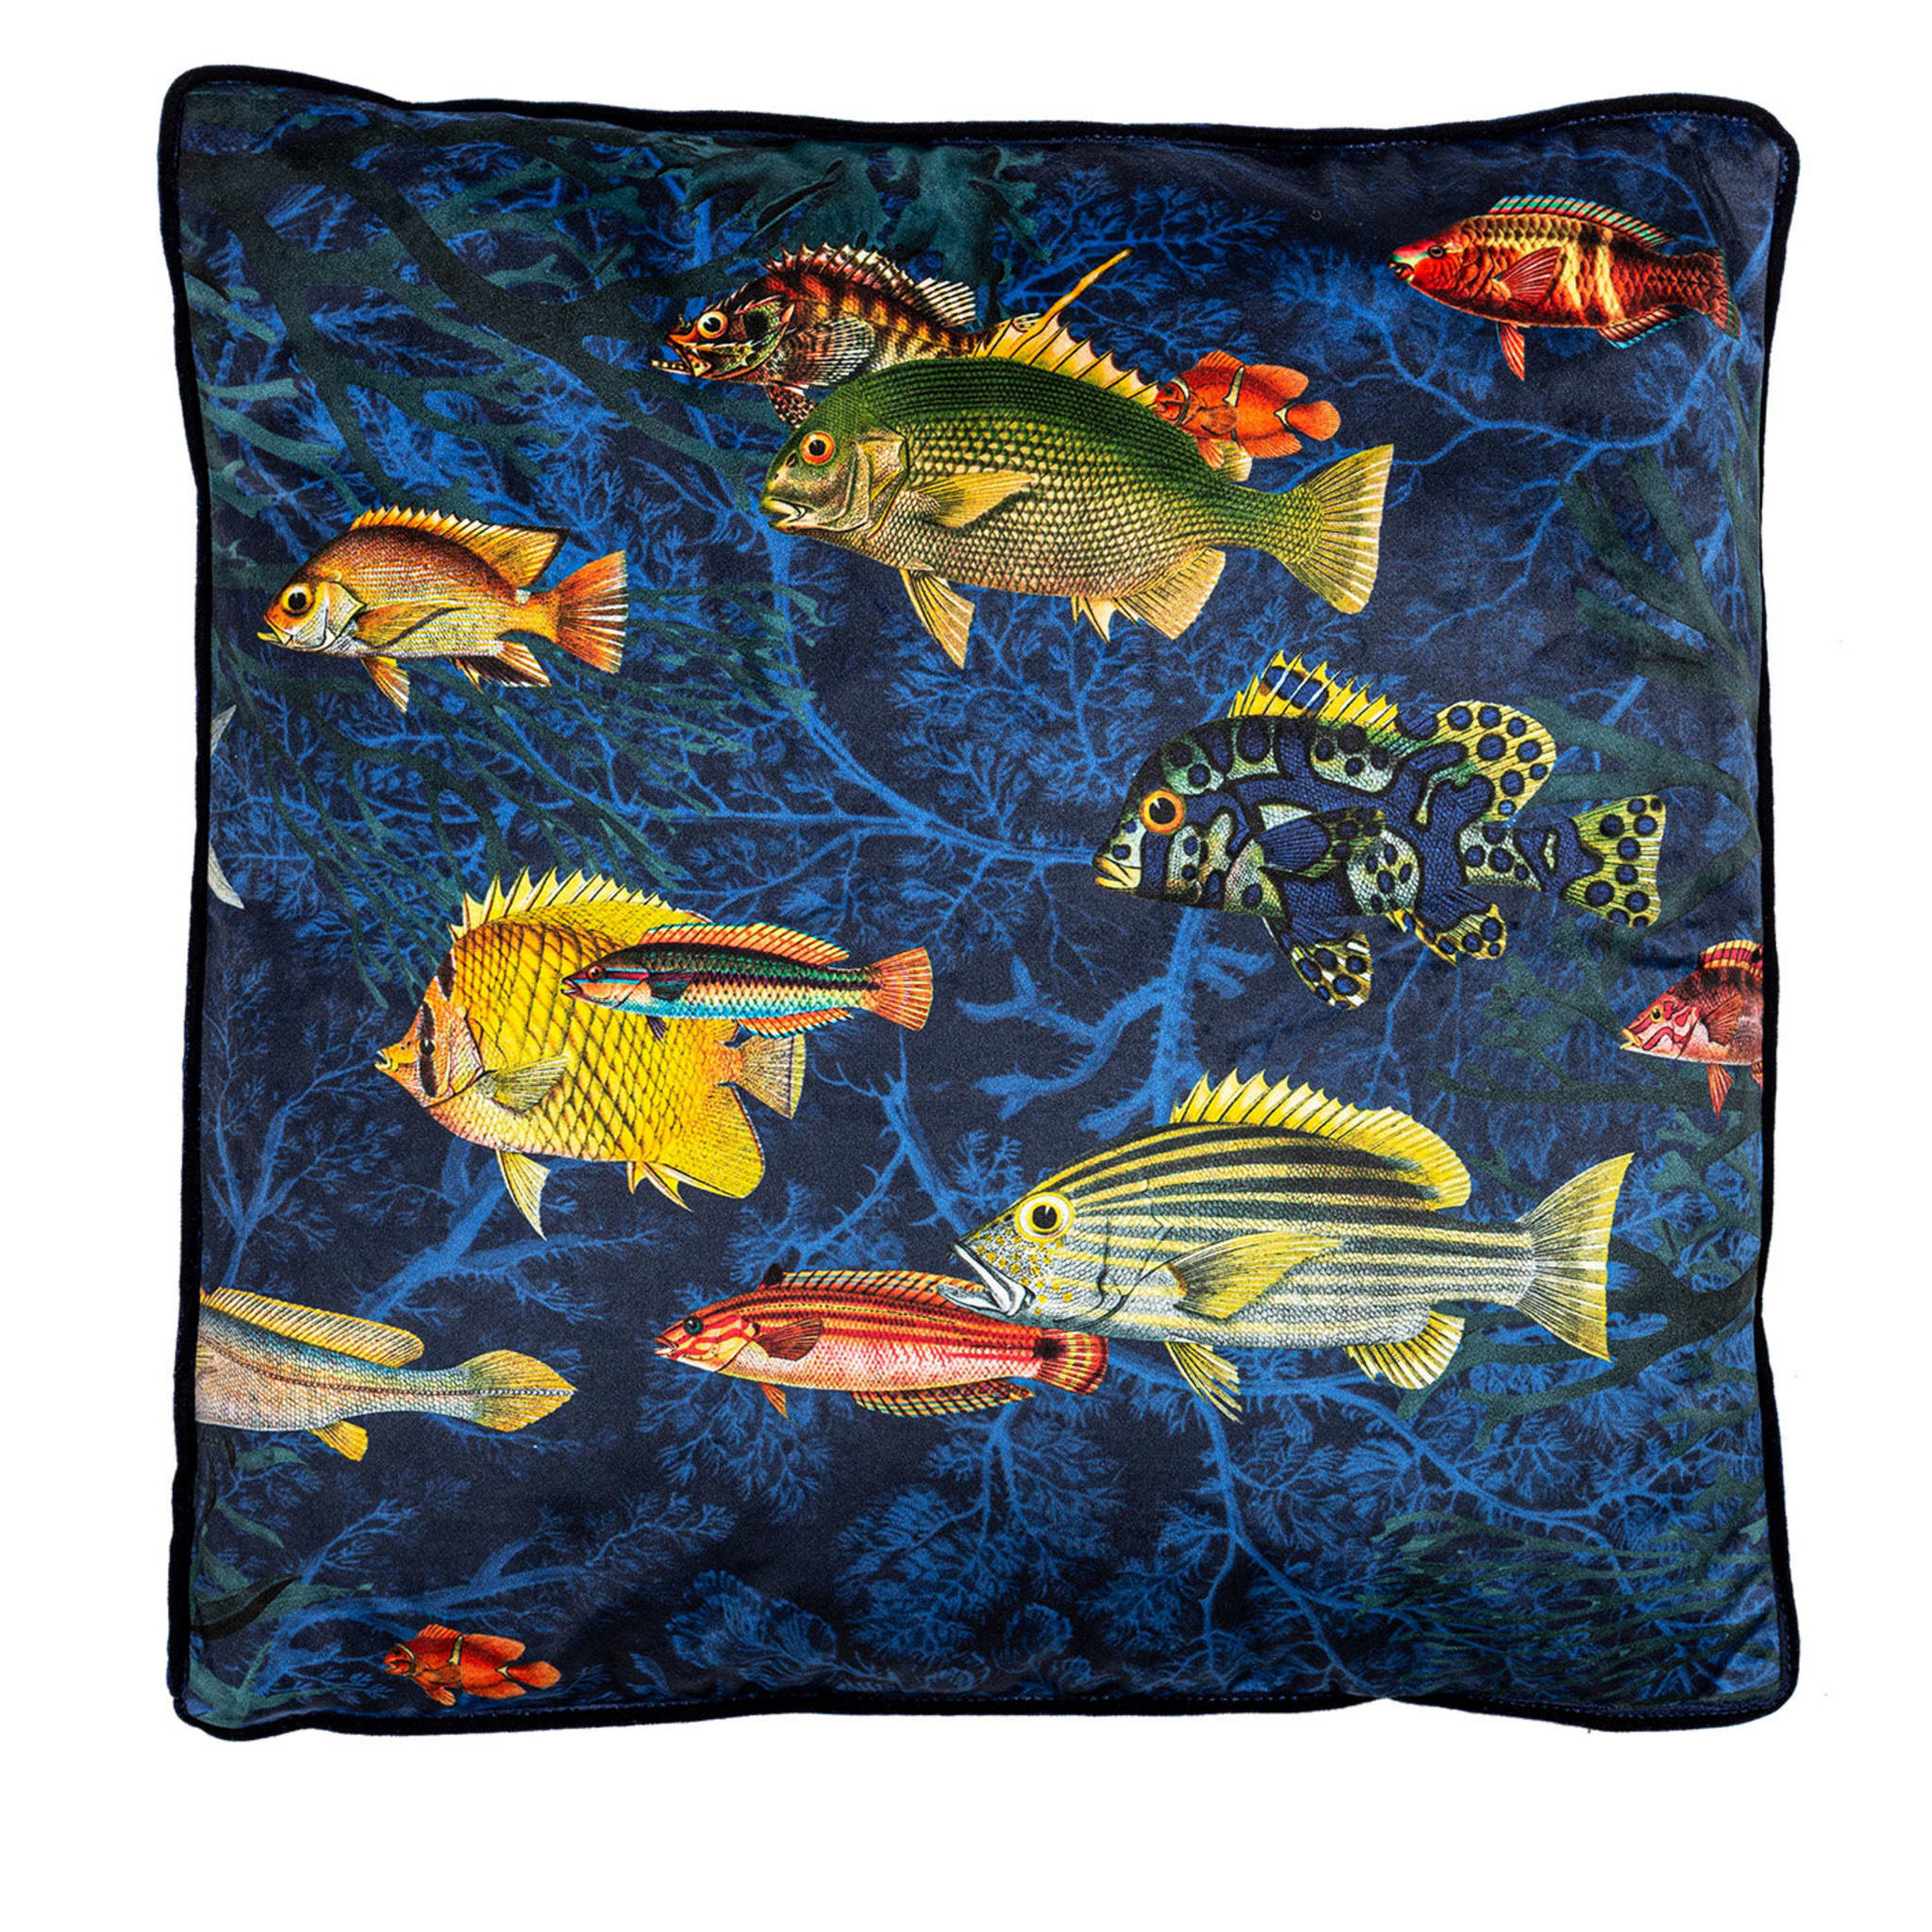 Amami Islands Velvet Cushion With Tropical Fish #6 - Main view